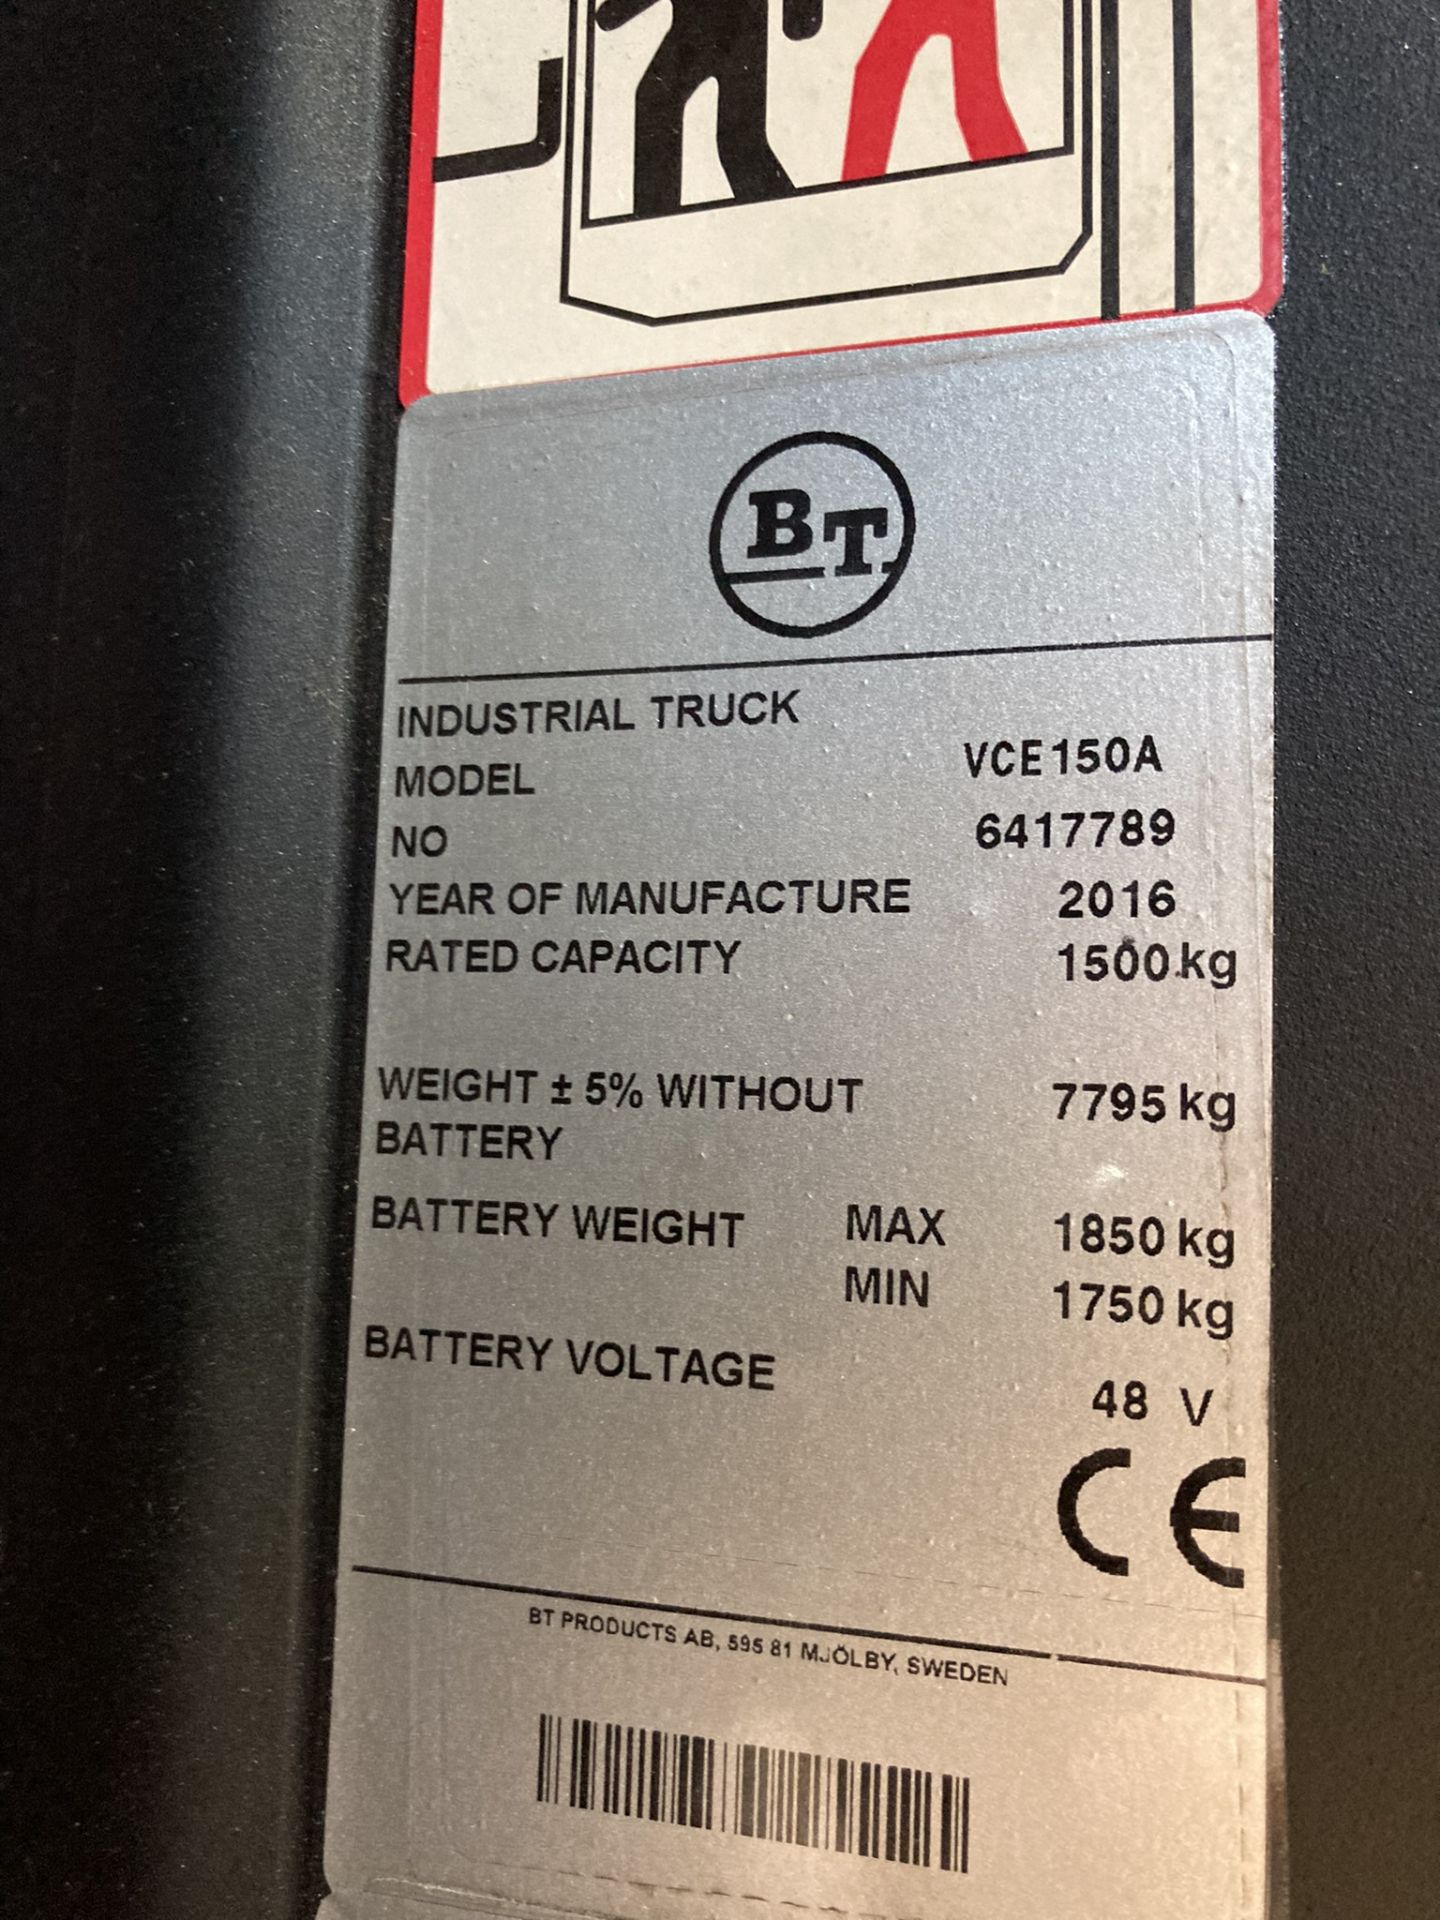 1 BT (Toyota) Vector, VCE 150A, Very narrow aisle electric forklift with charger, Serial Number: 64 - Image 5 of 5